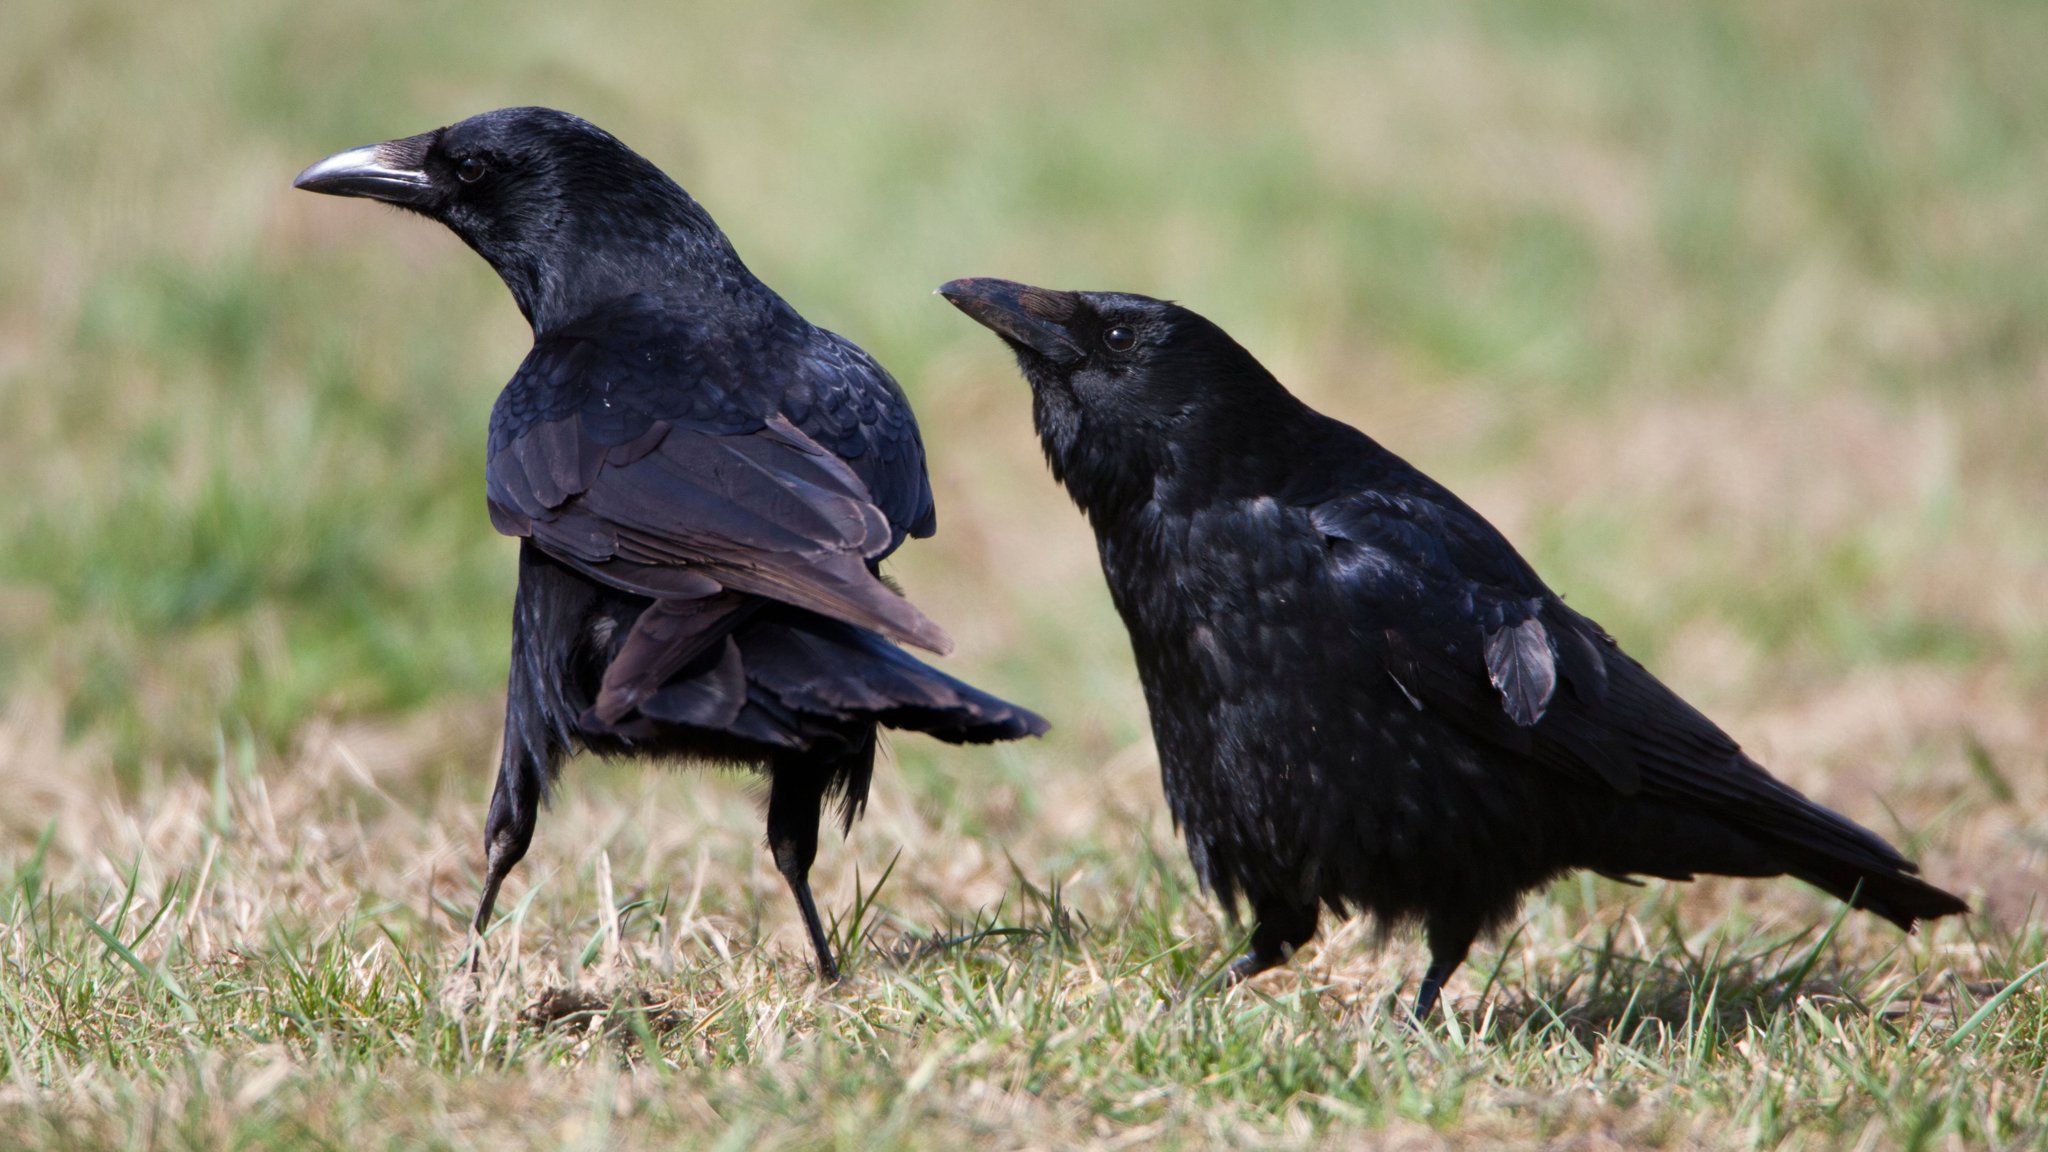 How a bird can chase off the black dog